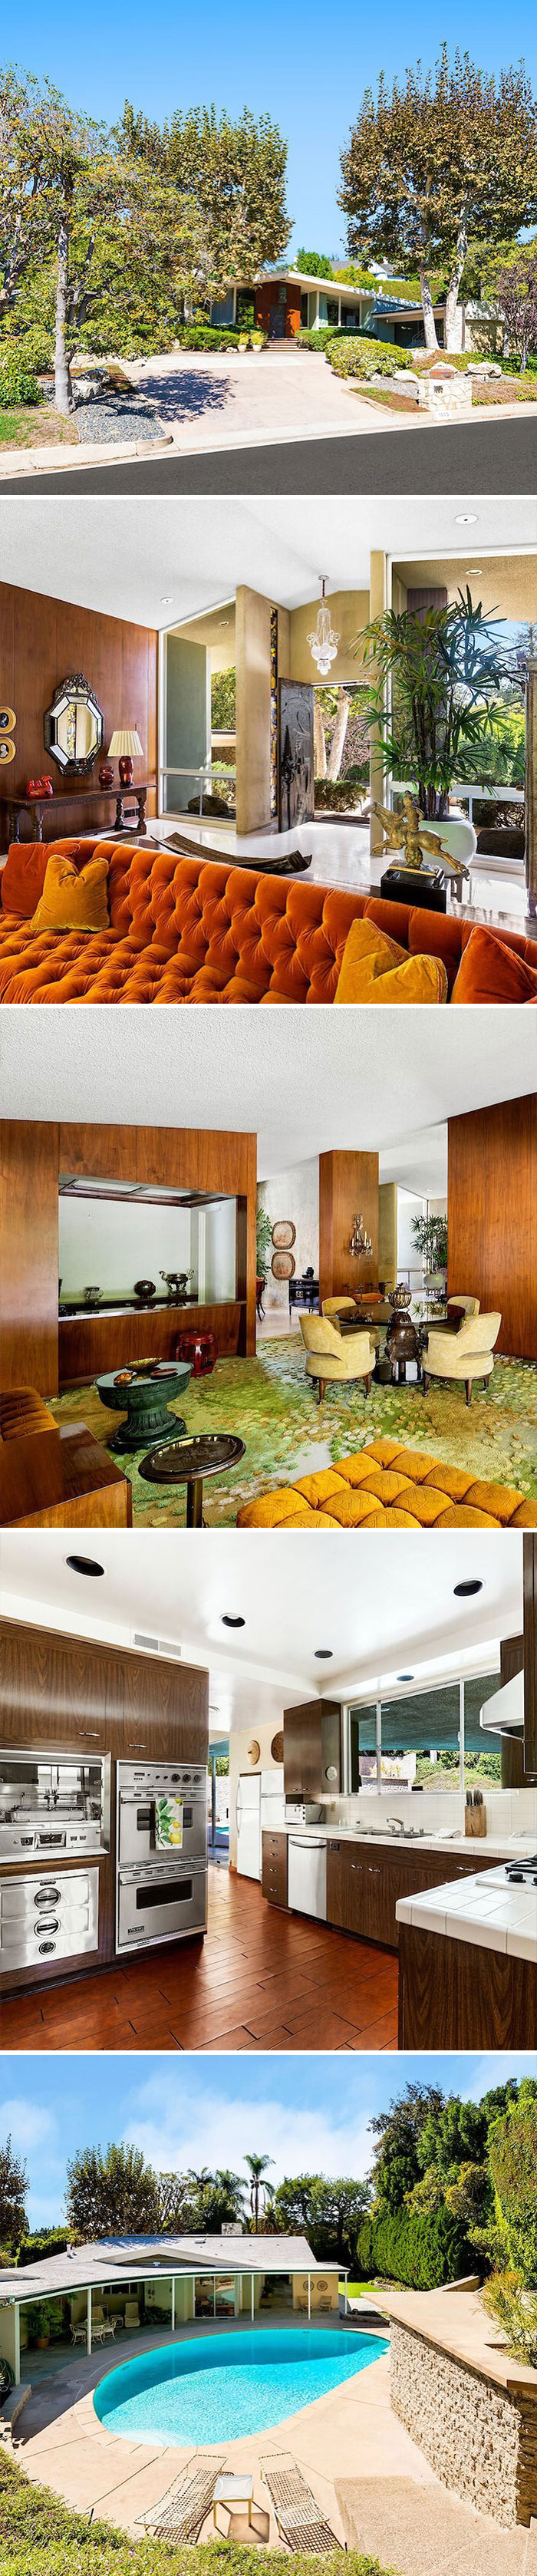 Zillowgonewildi’ve Never Said This Before But Here’s A Perfect Mid-Century Modern In Beverly Hills Thats Being Listed For The First Time In Over 60 Years. Currently Listed For $6,995,000. 5 Bd, 4 Ba. 3,989 Sq Ft. .49 Acres